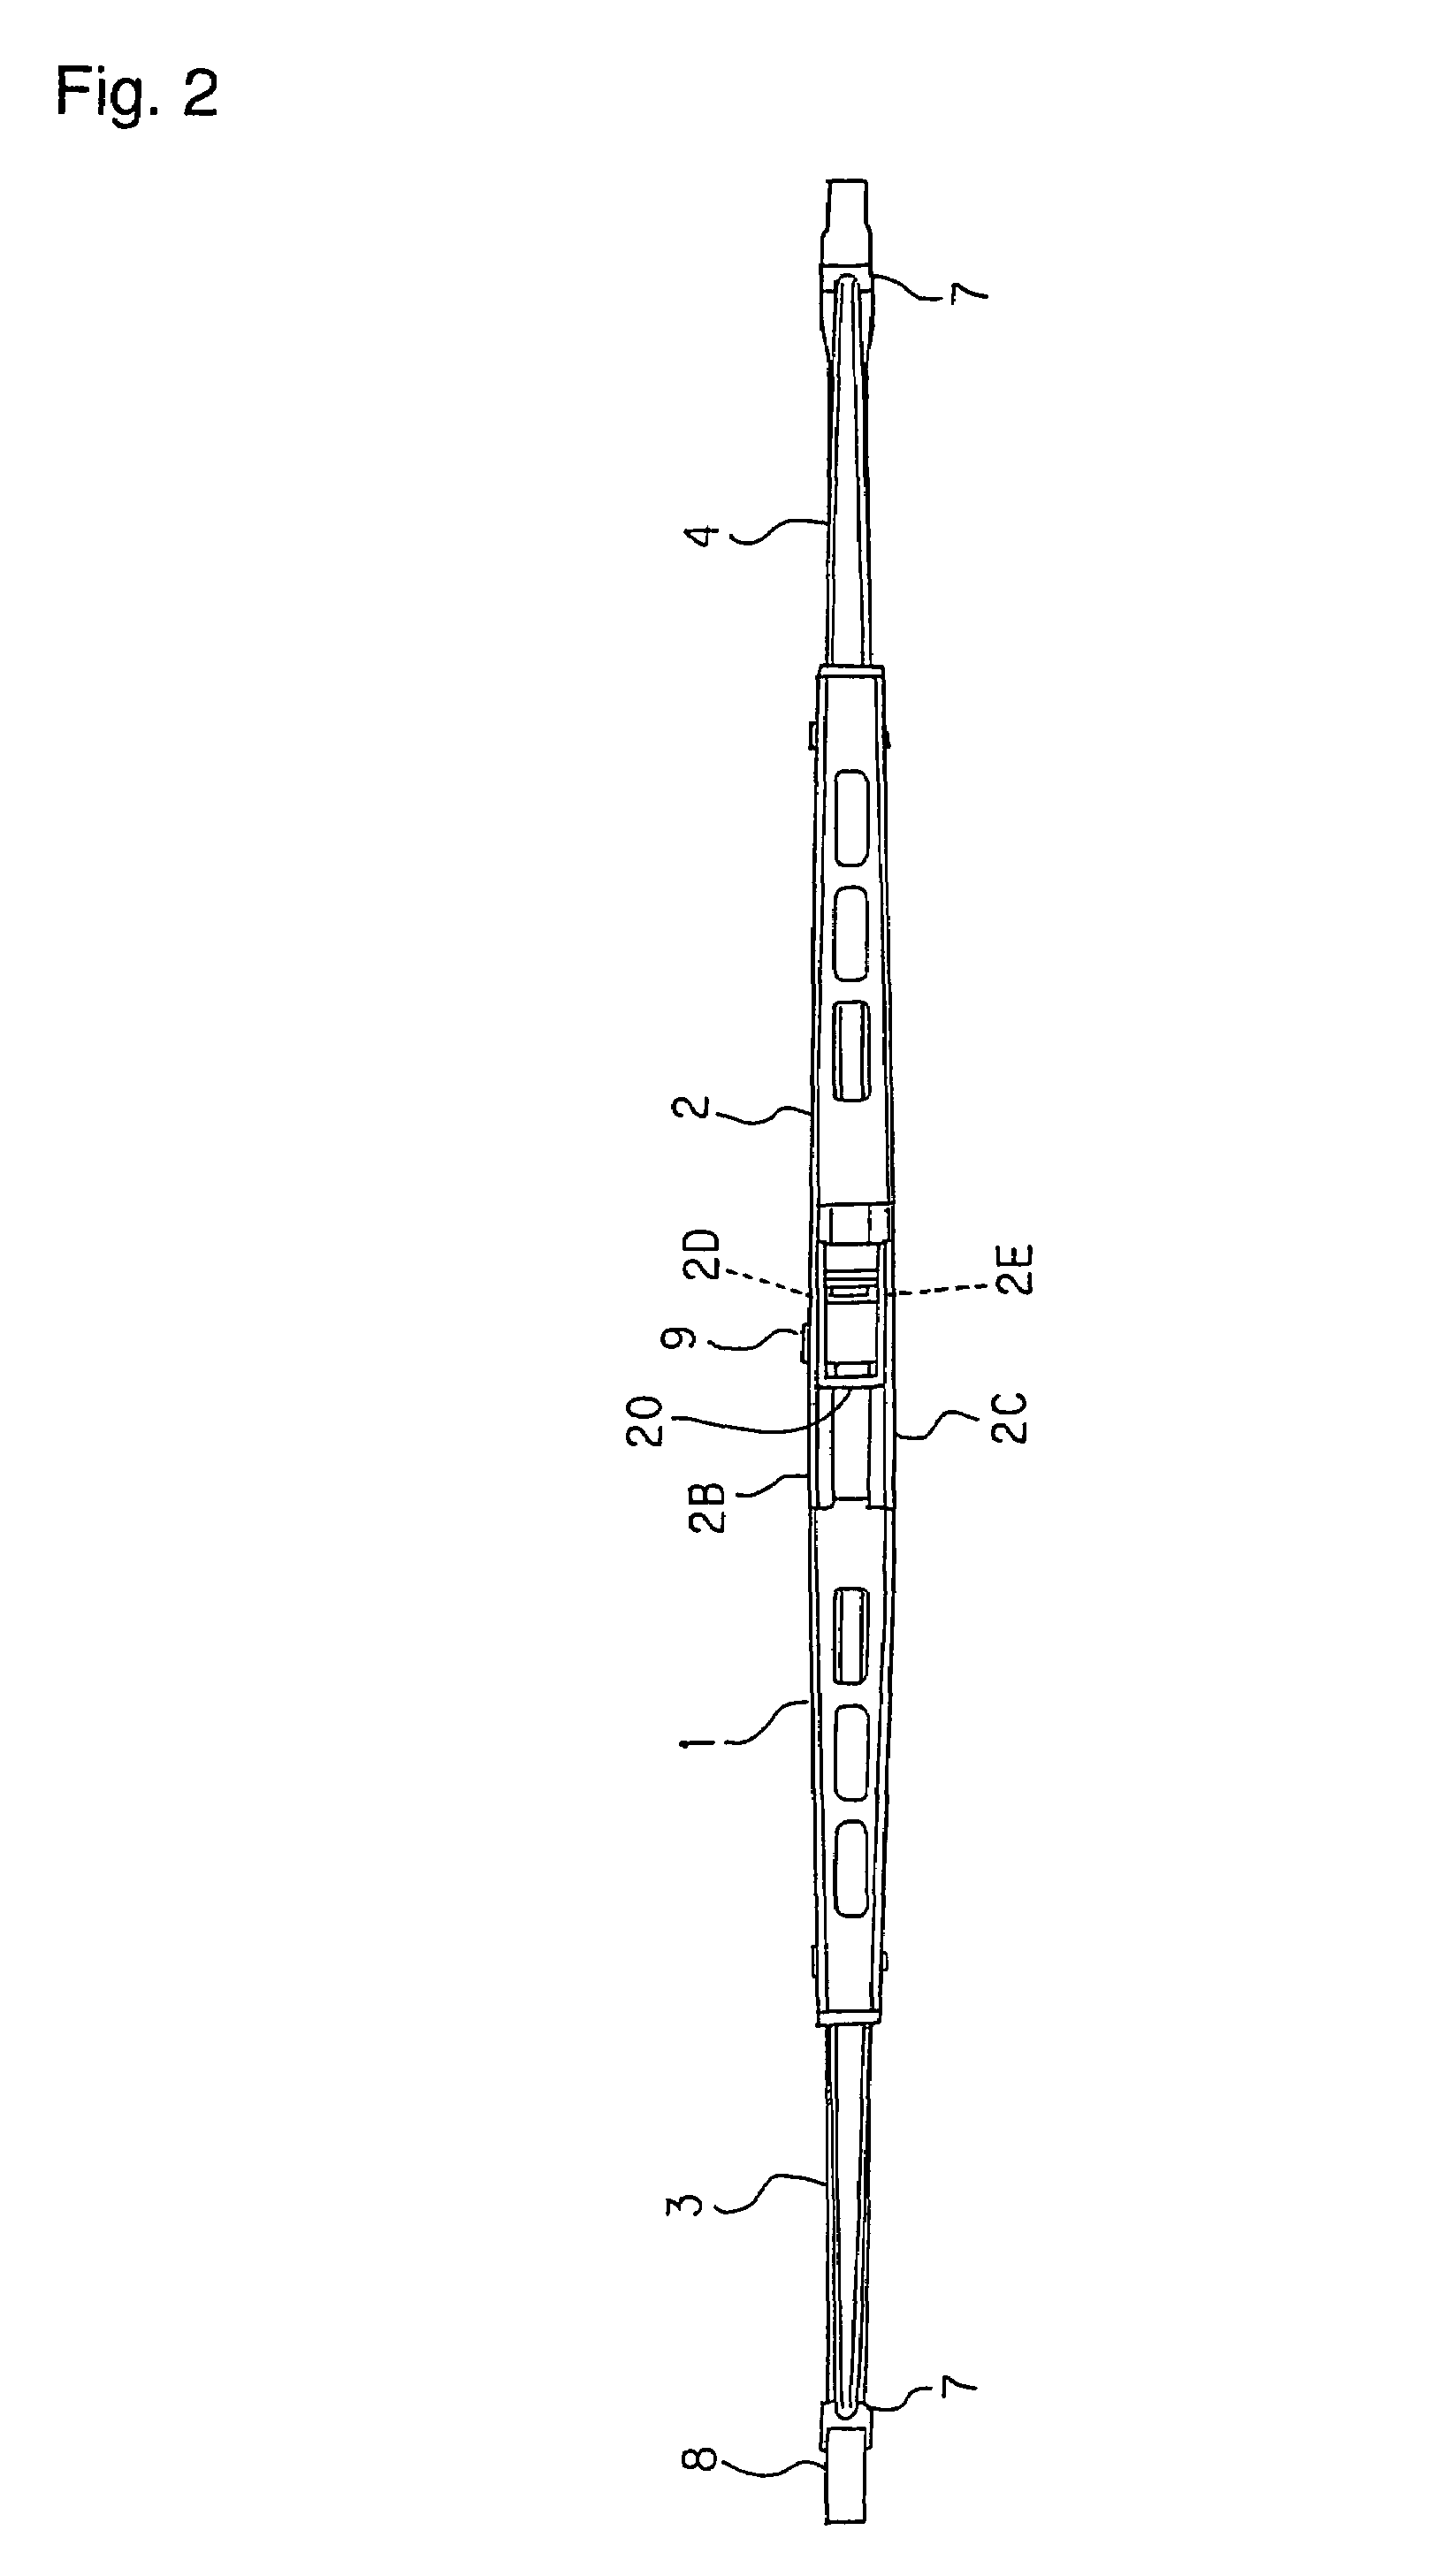 Connector for securing wiper blade to wiper arm and wiper blade assembly